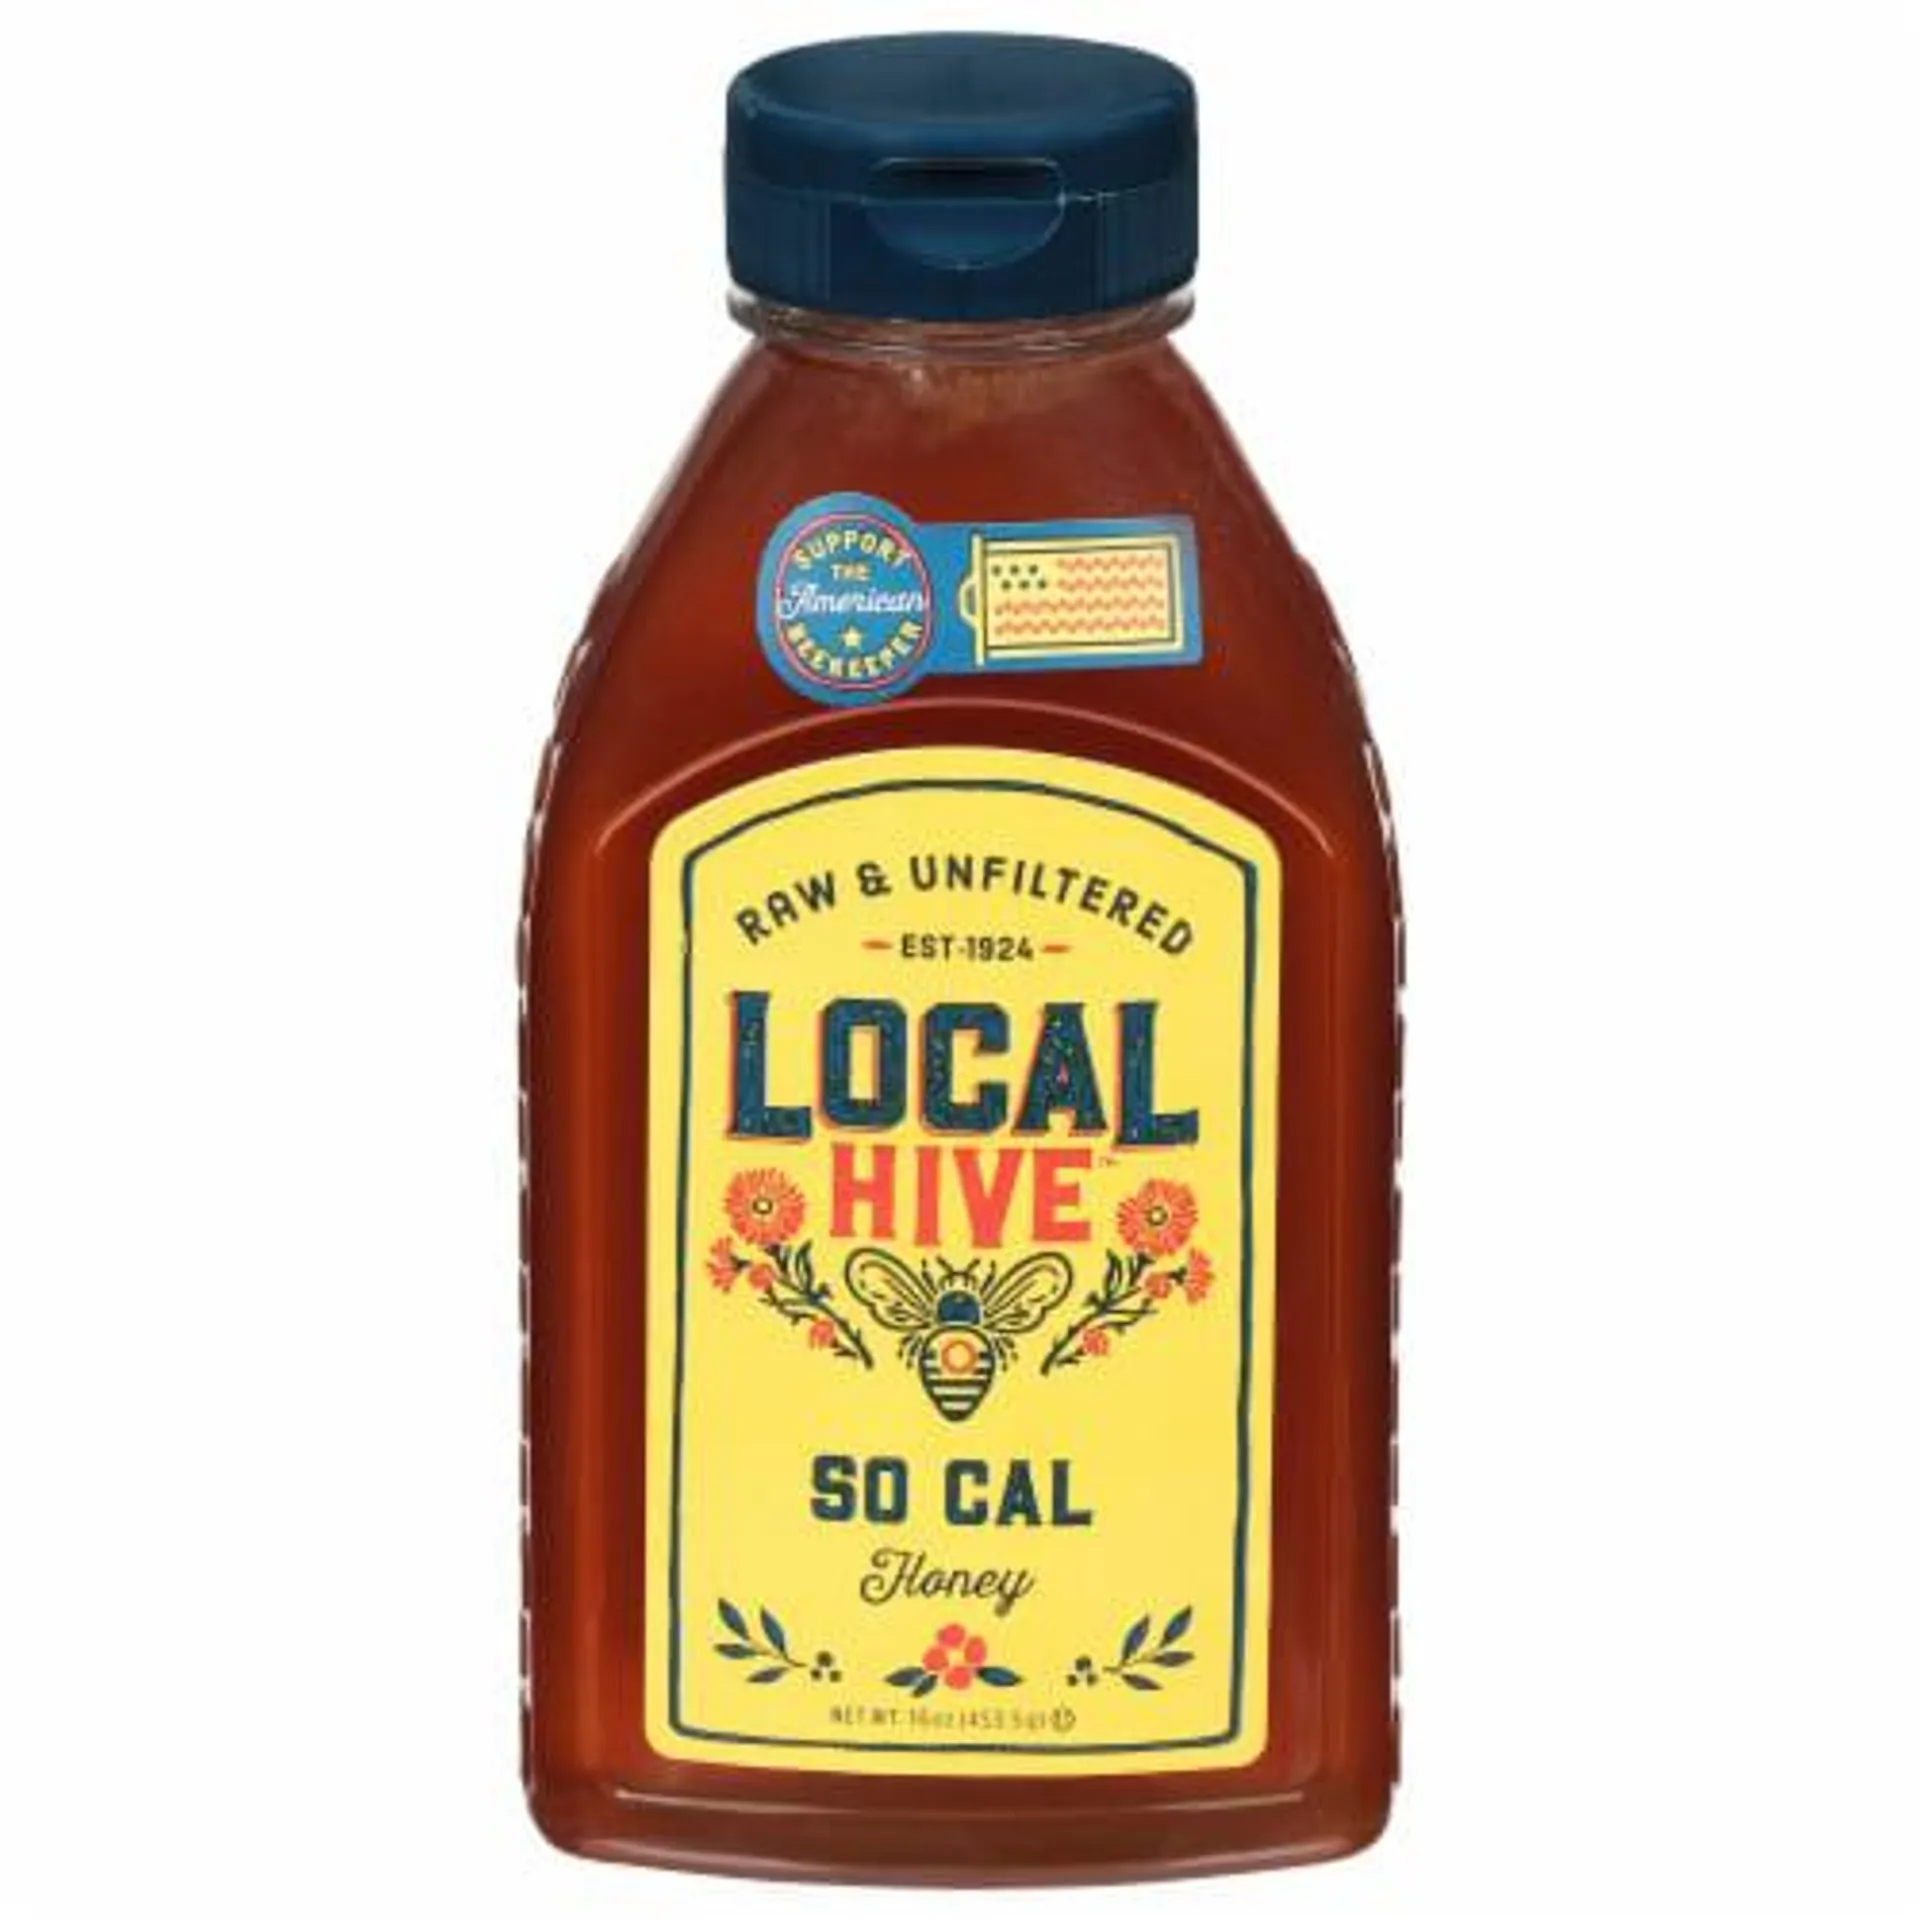 Local Hive So Cal Raw & Unfiltered Honey